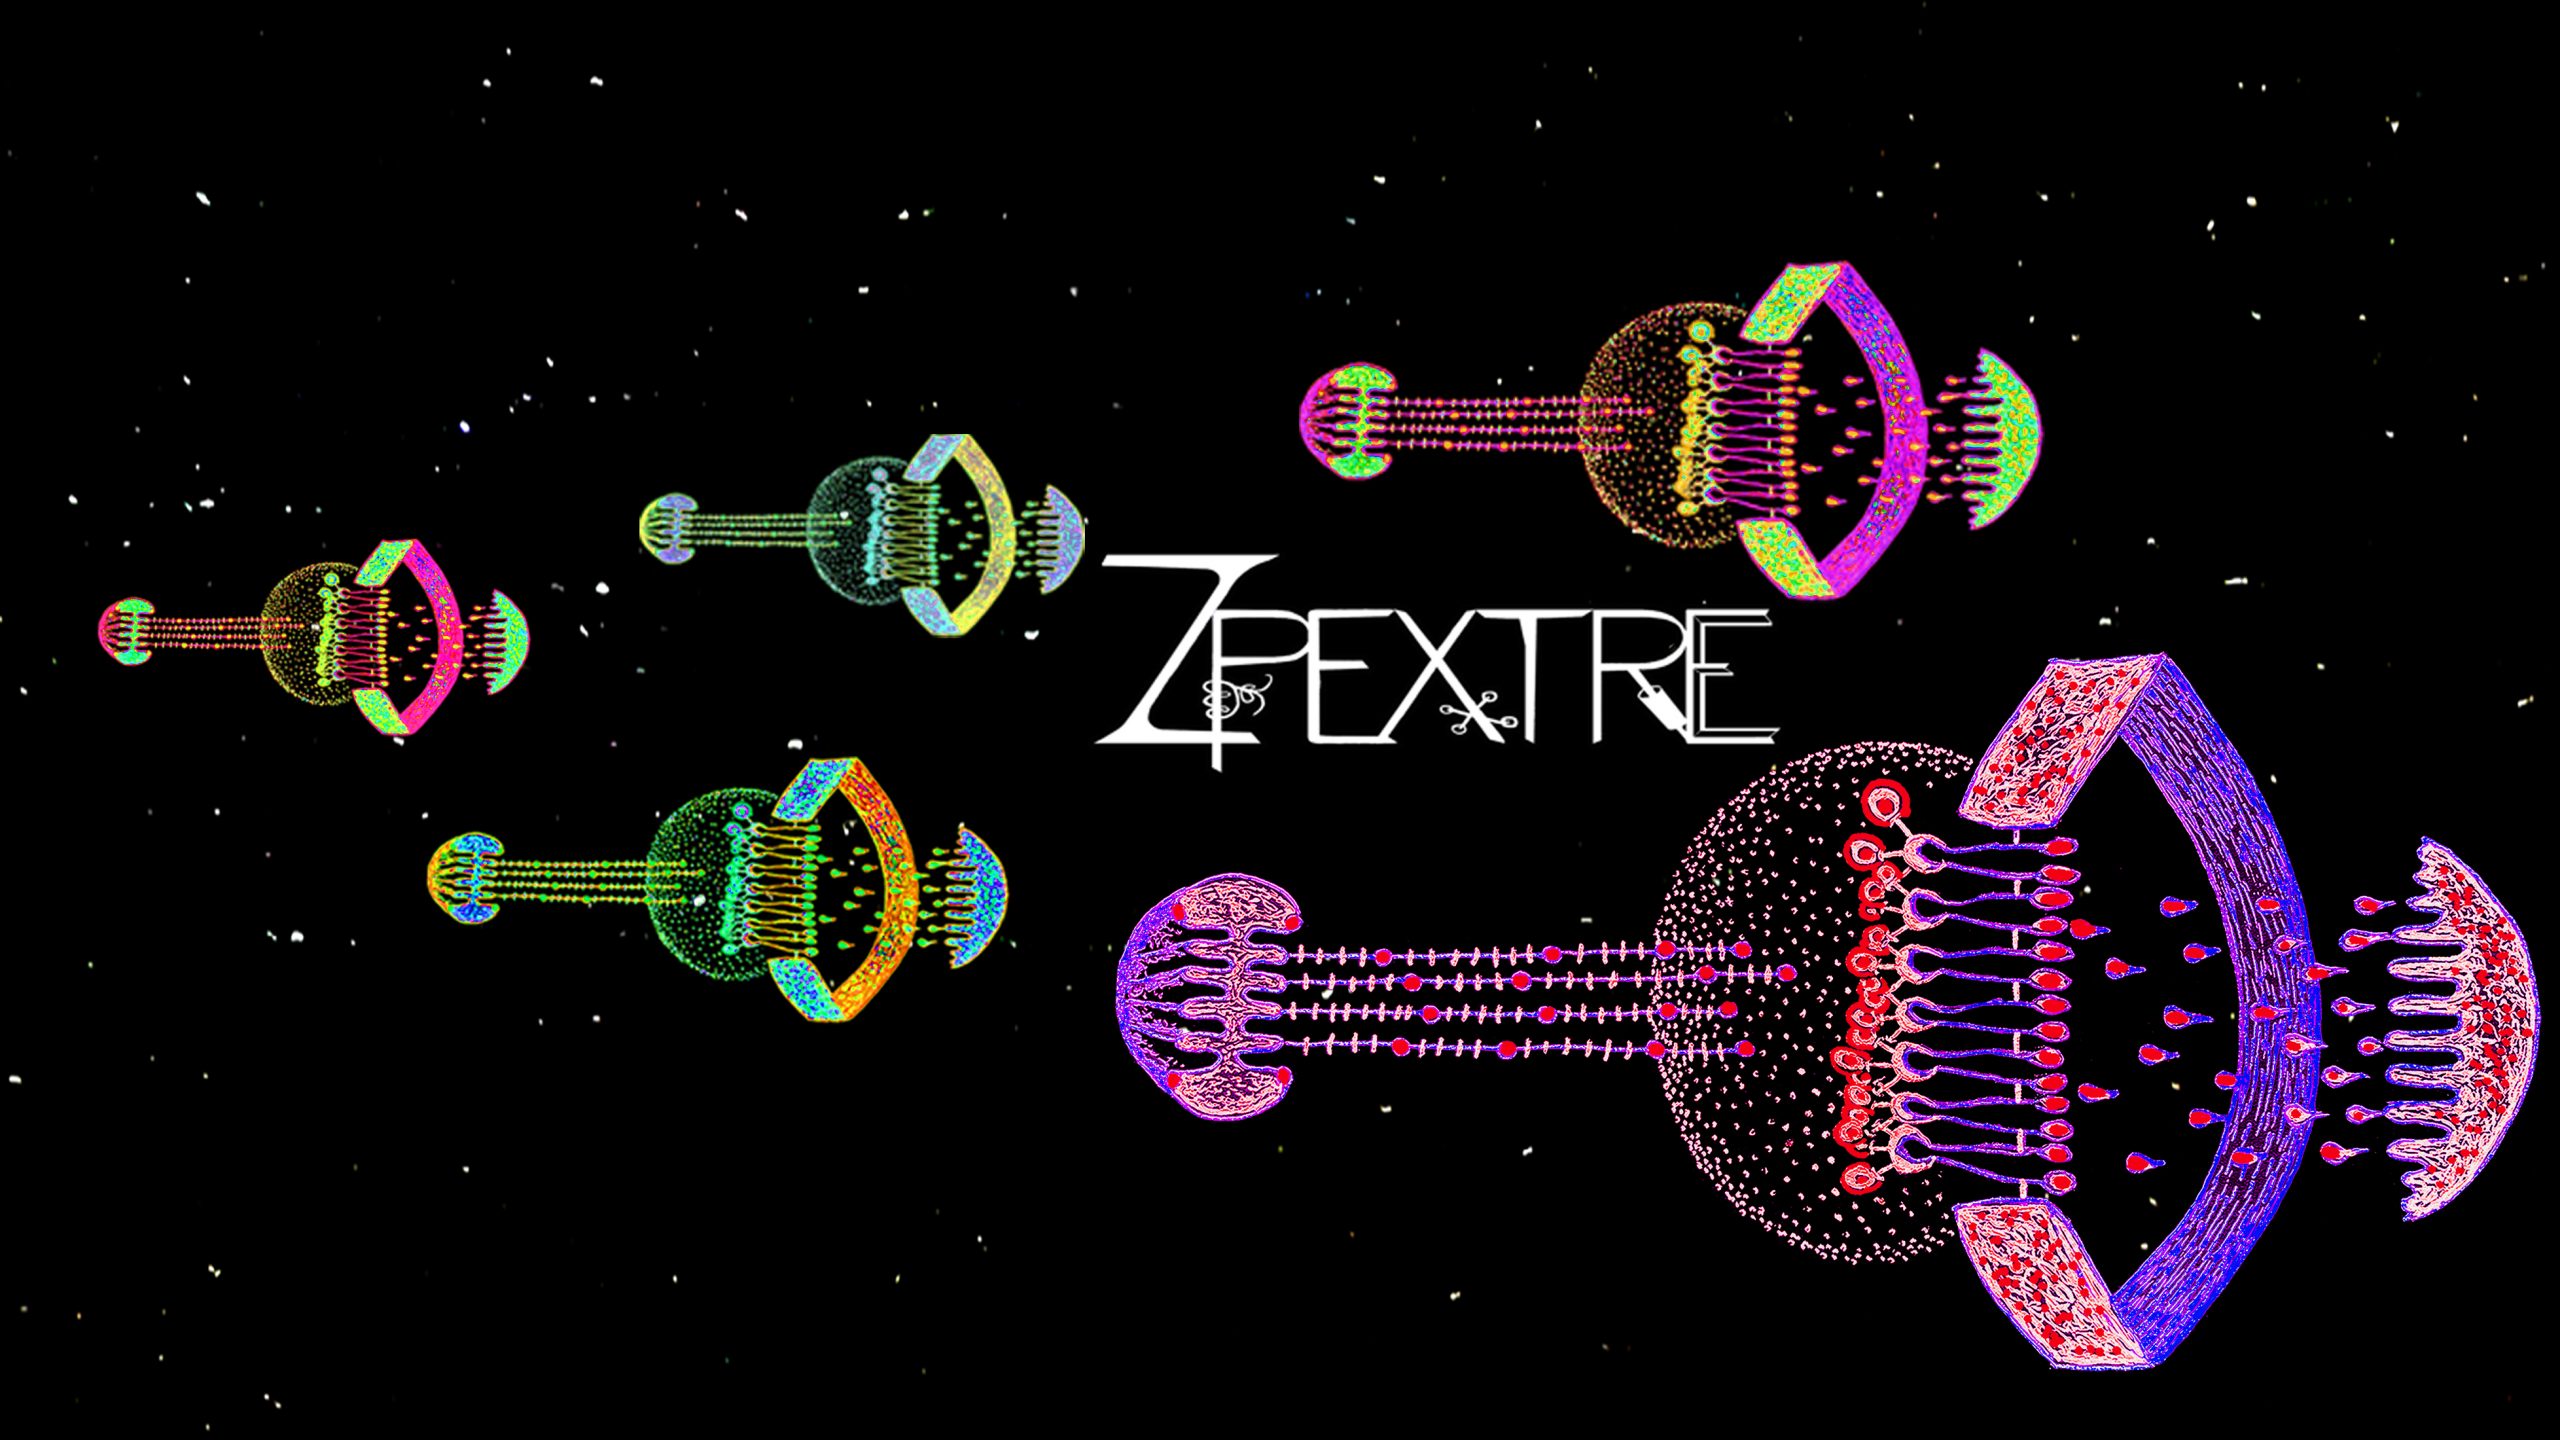 Interview: Zpextre